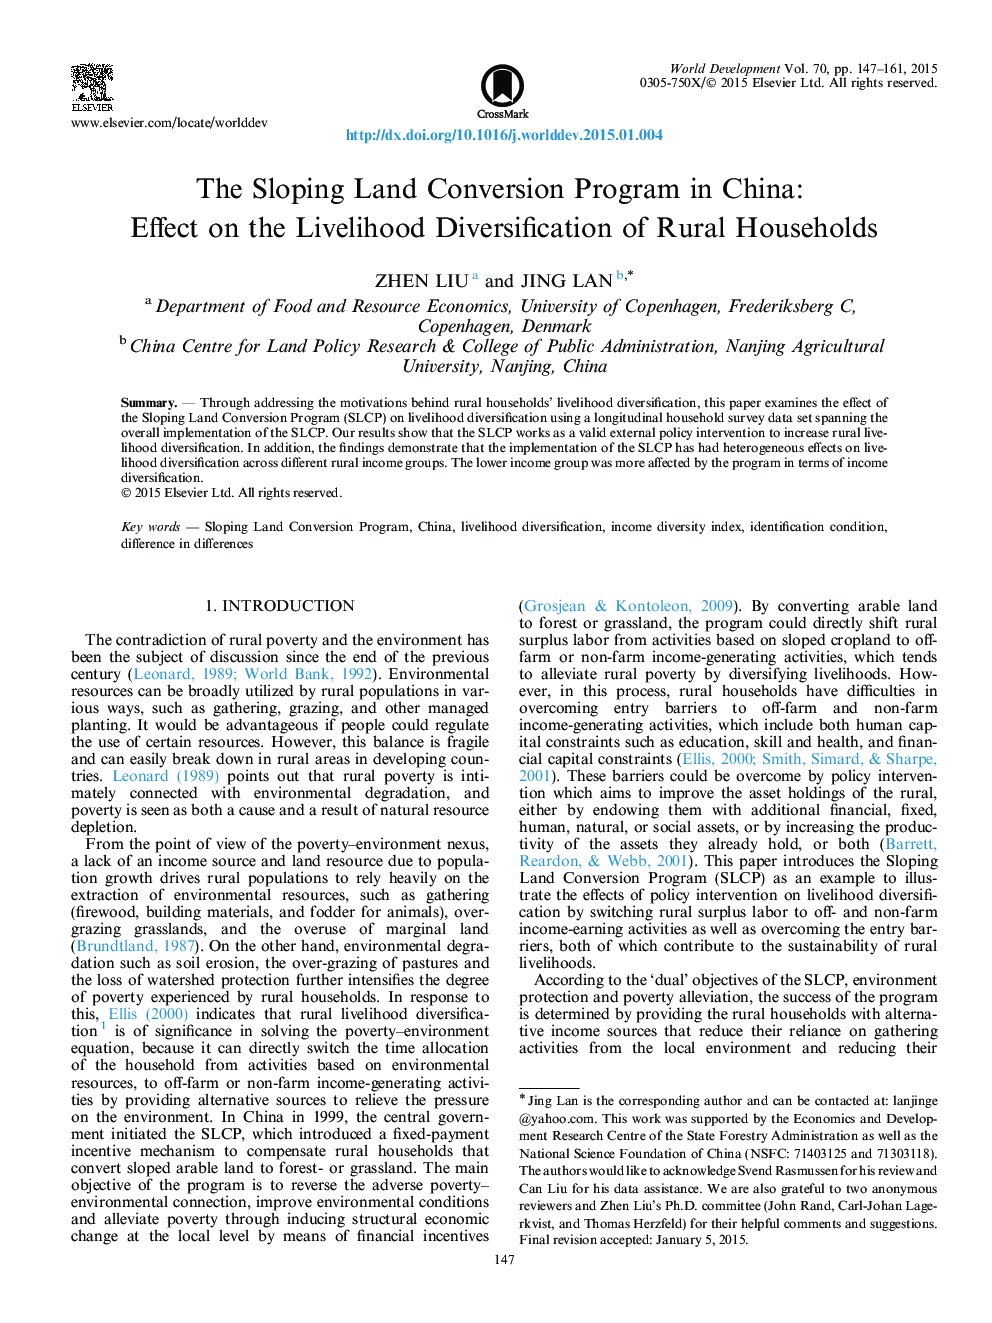 The Sloping Land Conversion Program in China: Effect on the Livelihood Diversification of Rural Households